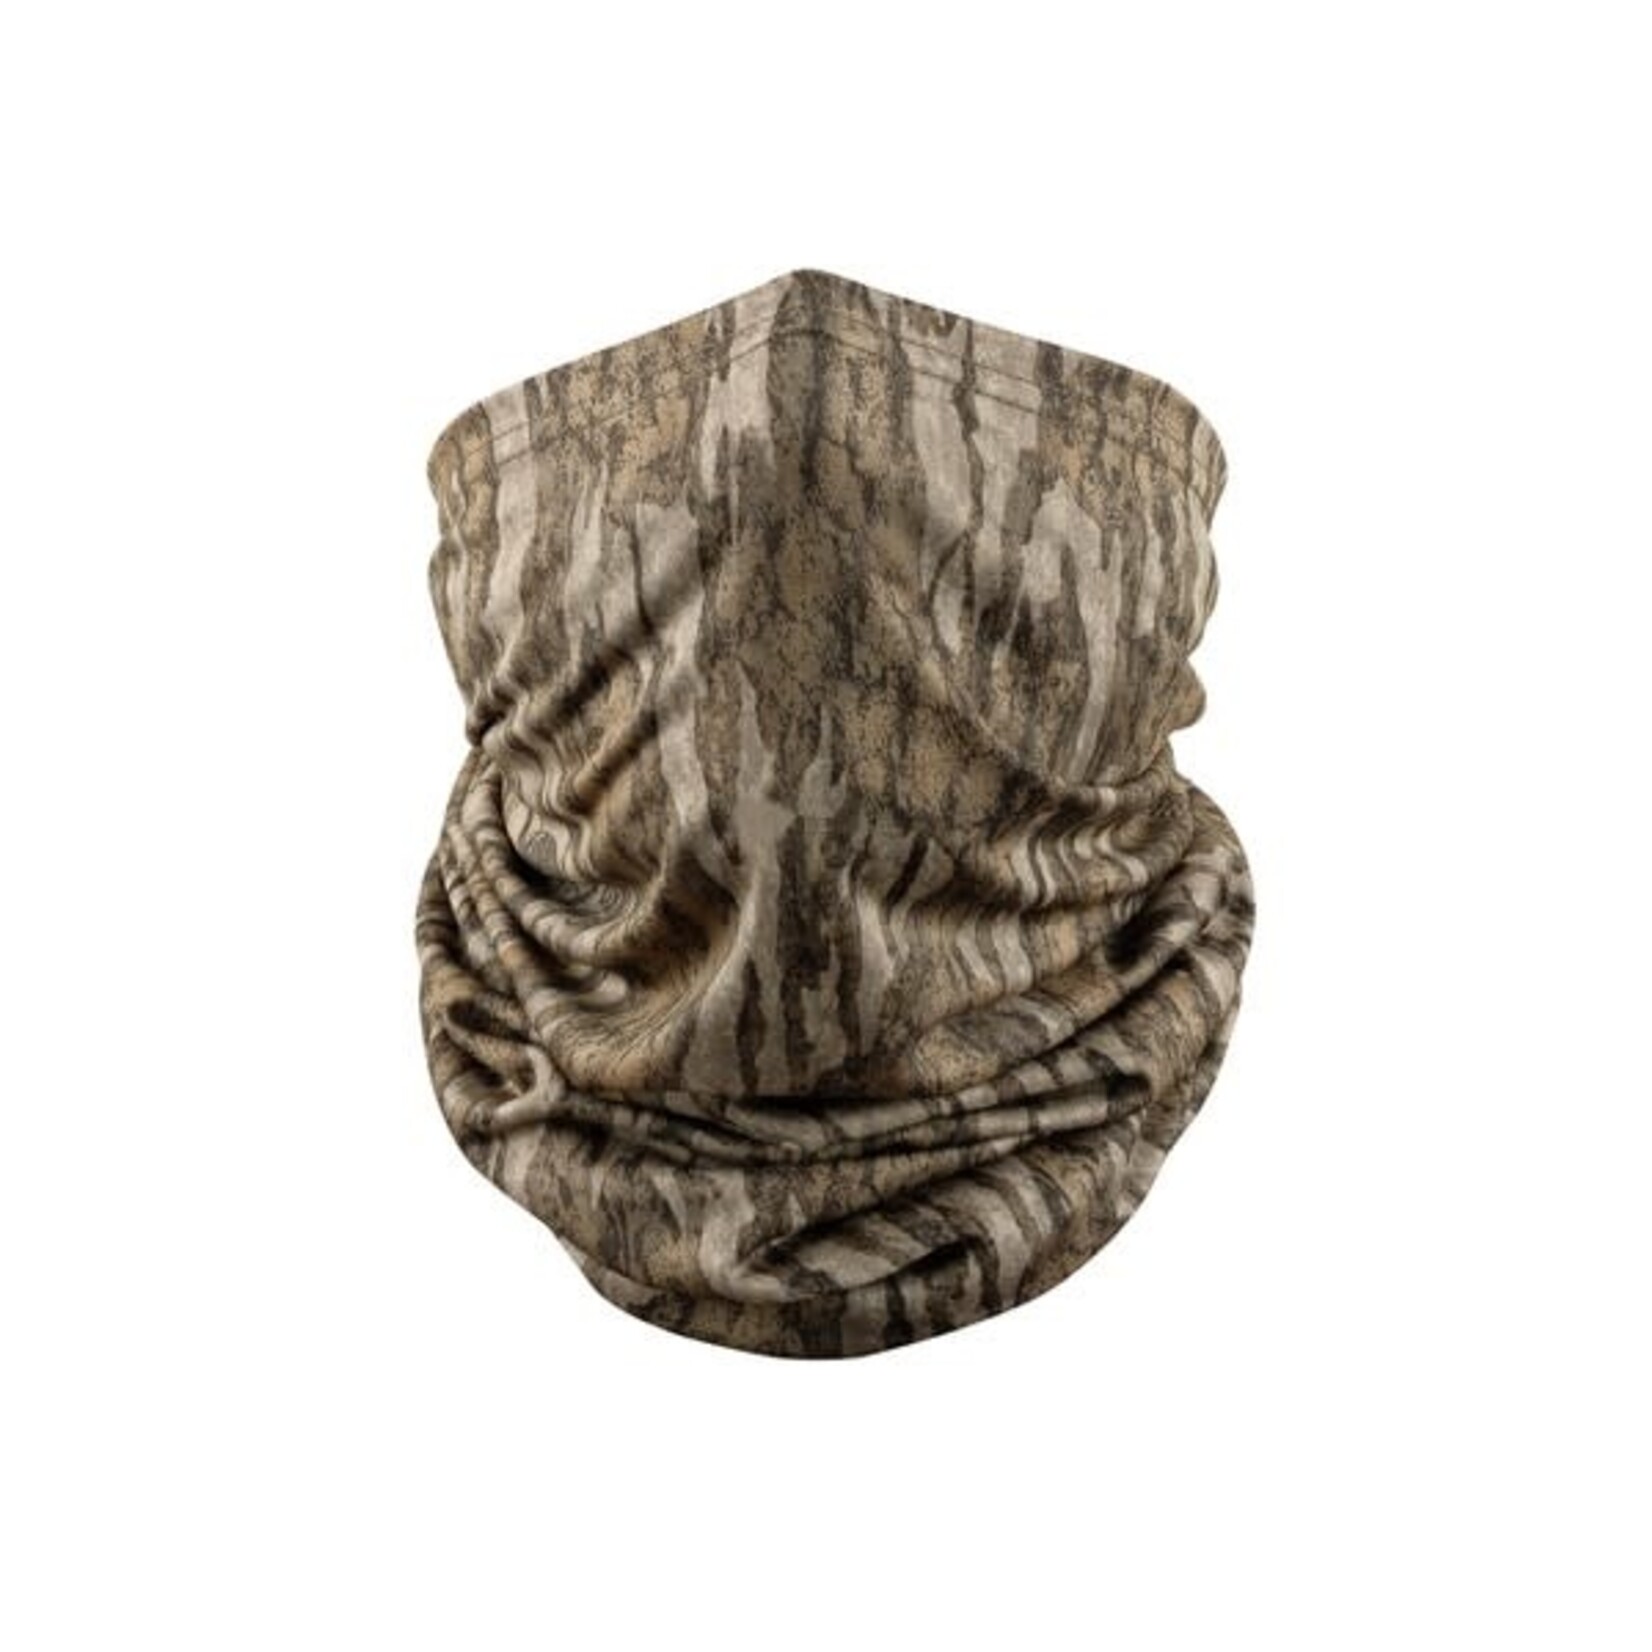 HQ Outfitters Camo Neck Gaiter